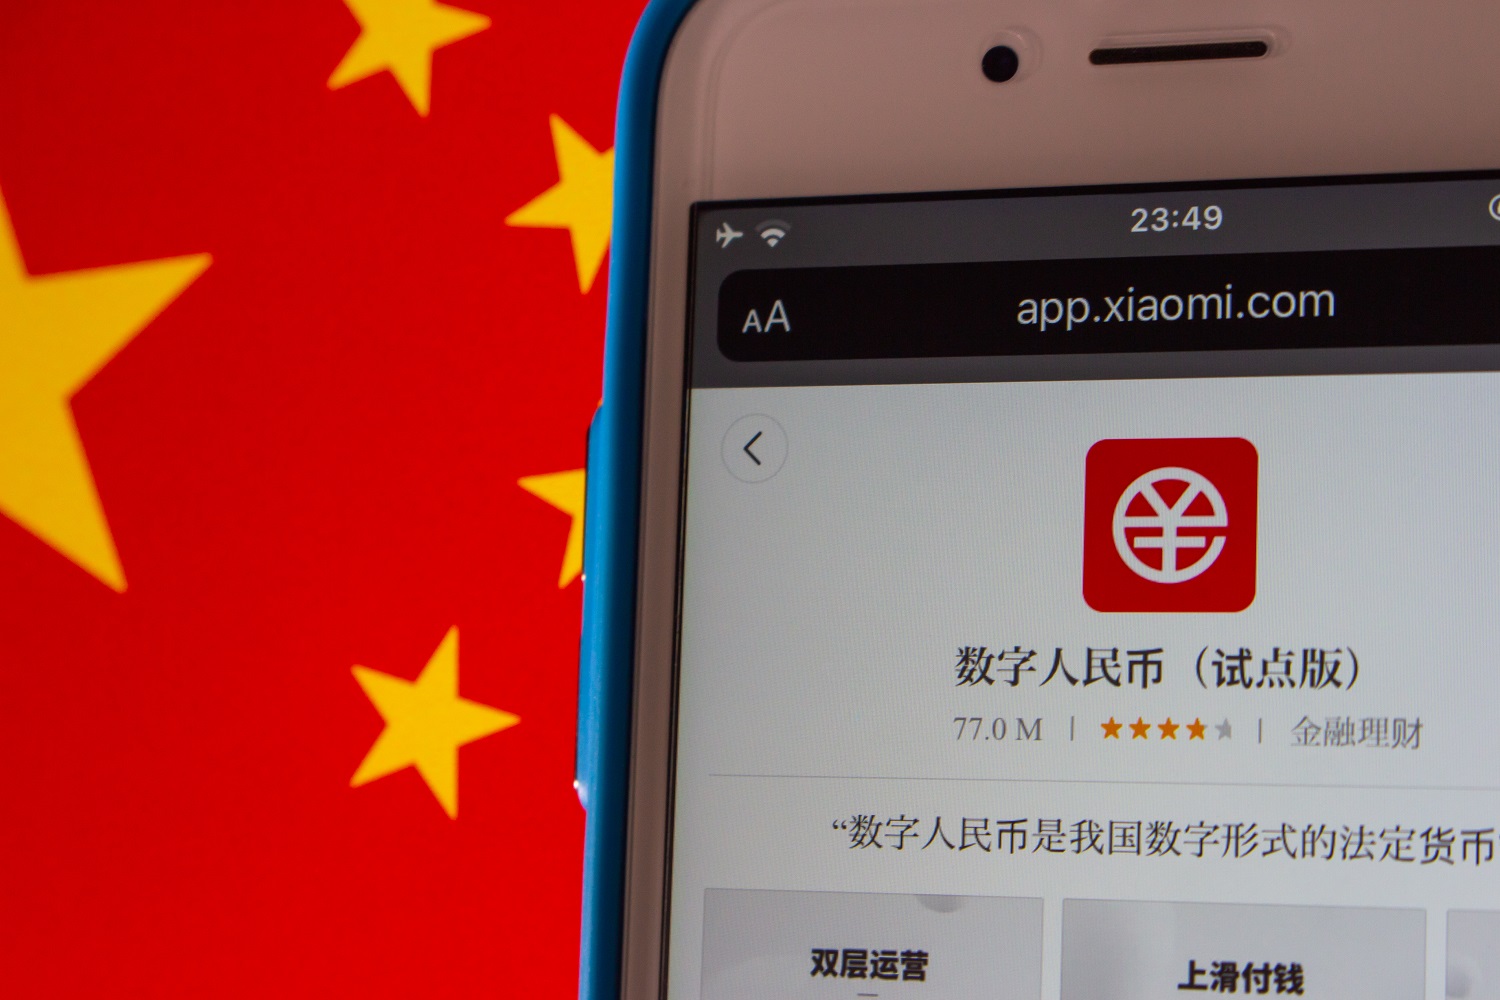 The Chinese digital yuan app on Xiaomi’s app marketplace against the backdrop of the Chinese flag.